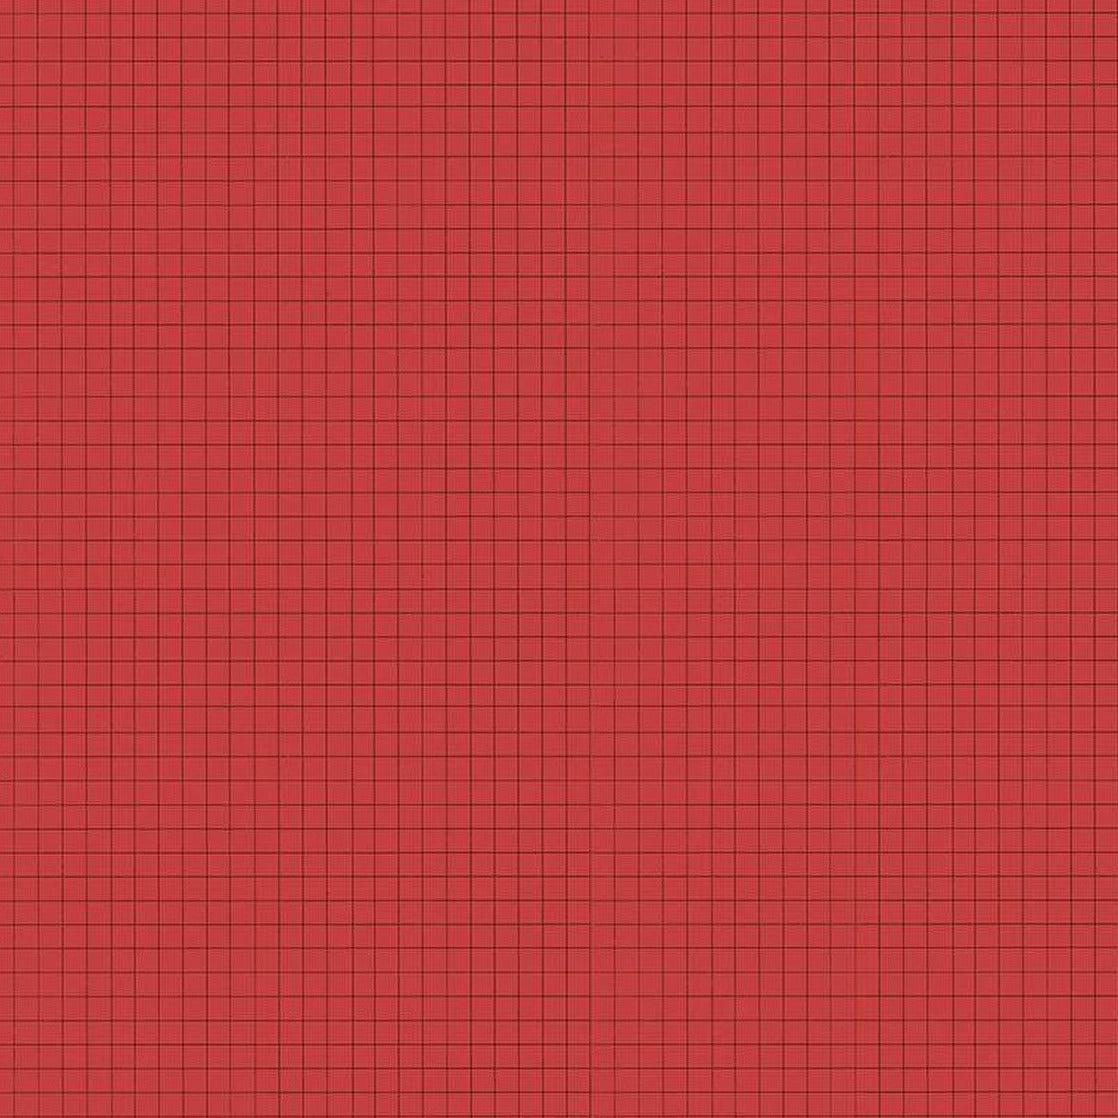 Sew Journal Red Graph Paper Fabric